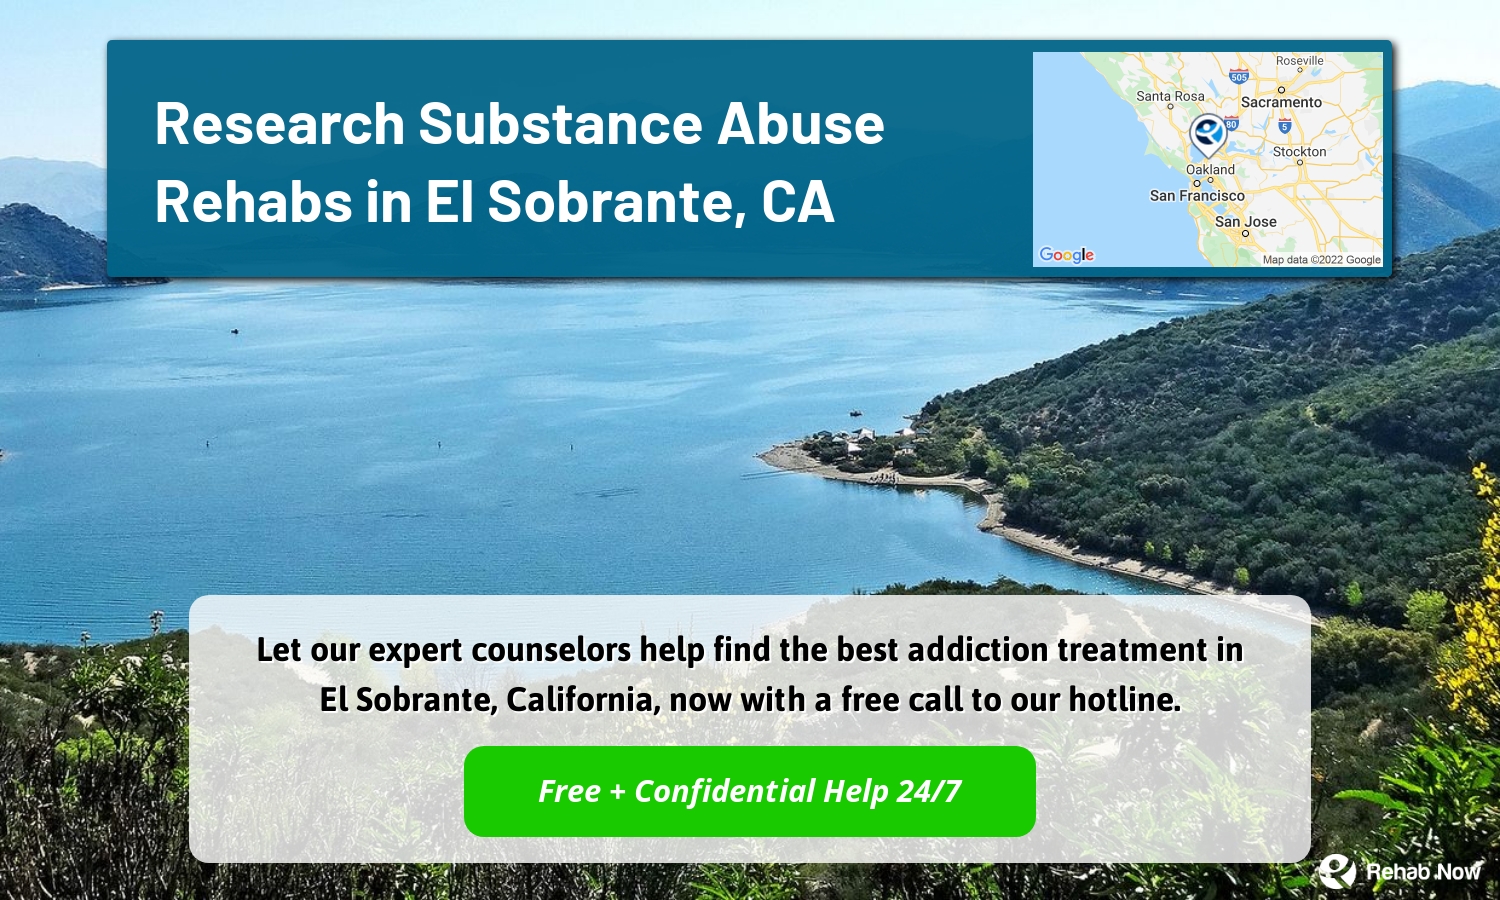 Let our expert counselors help find the best addiction treatment in El Sobrante, California, now with a free call to our hotline.